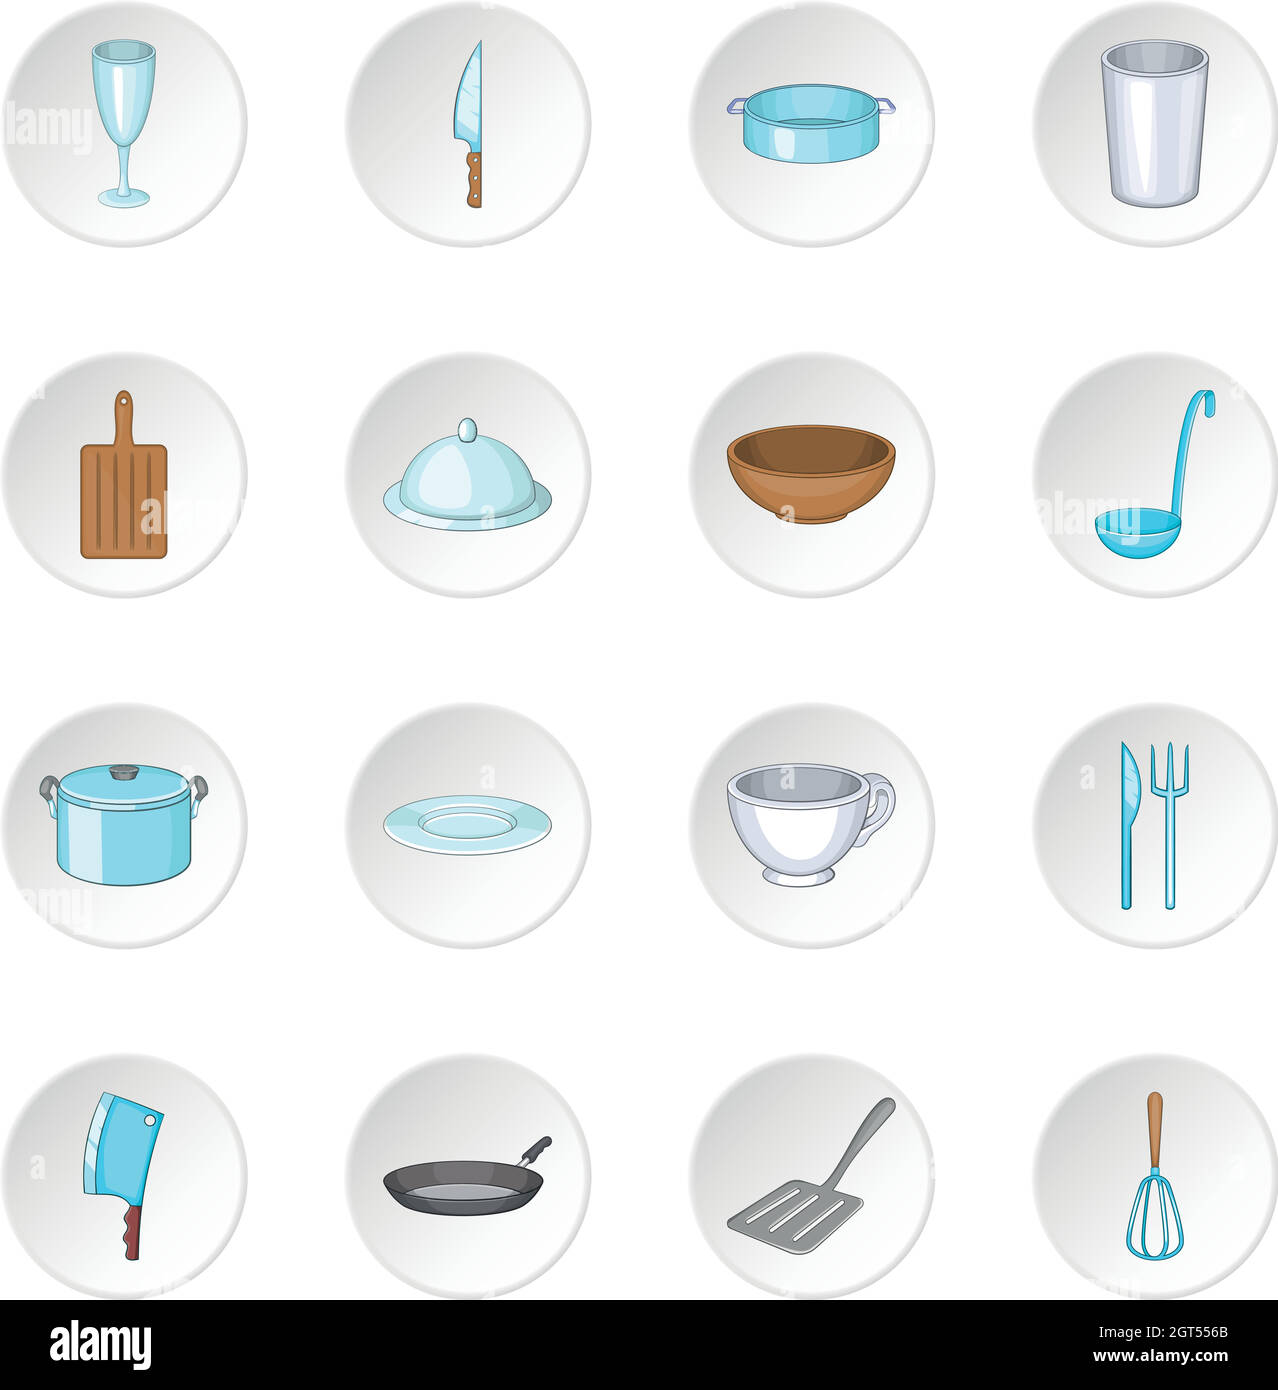 Basic dishes icons set Stock Vector